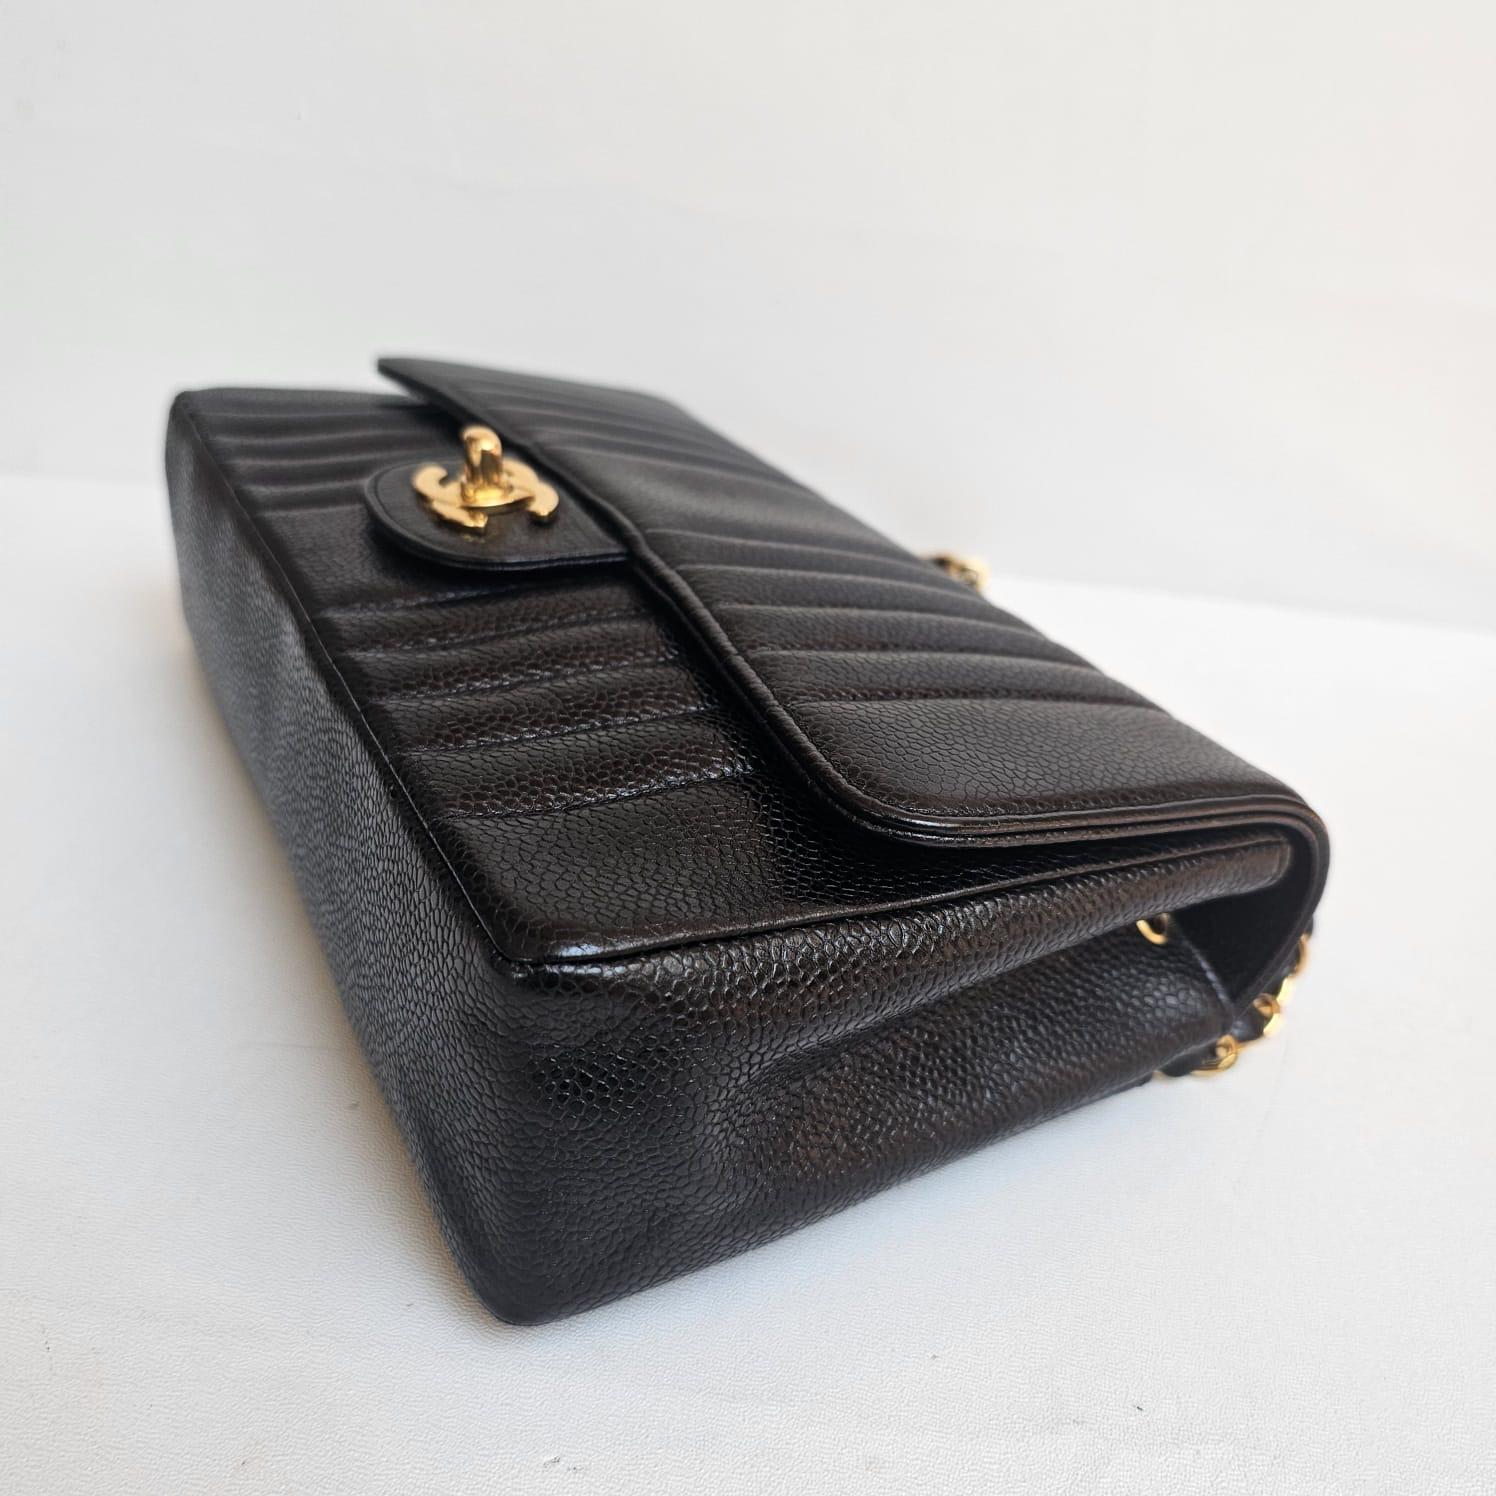 Rare medium vintage vertical flap in black caviar with gold hardware. Series #2. Beautiful condition, no significant rubbing at all. But the strap has been cut so it can only be worn as shoulder bag. Comes with its holo intact and replacement dust